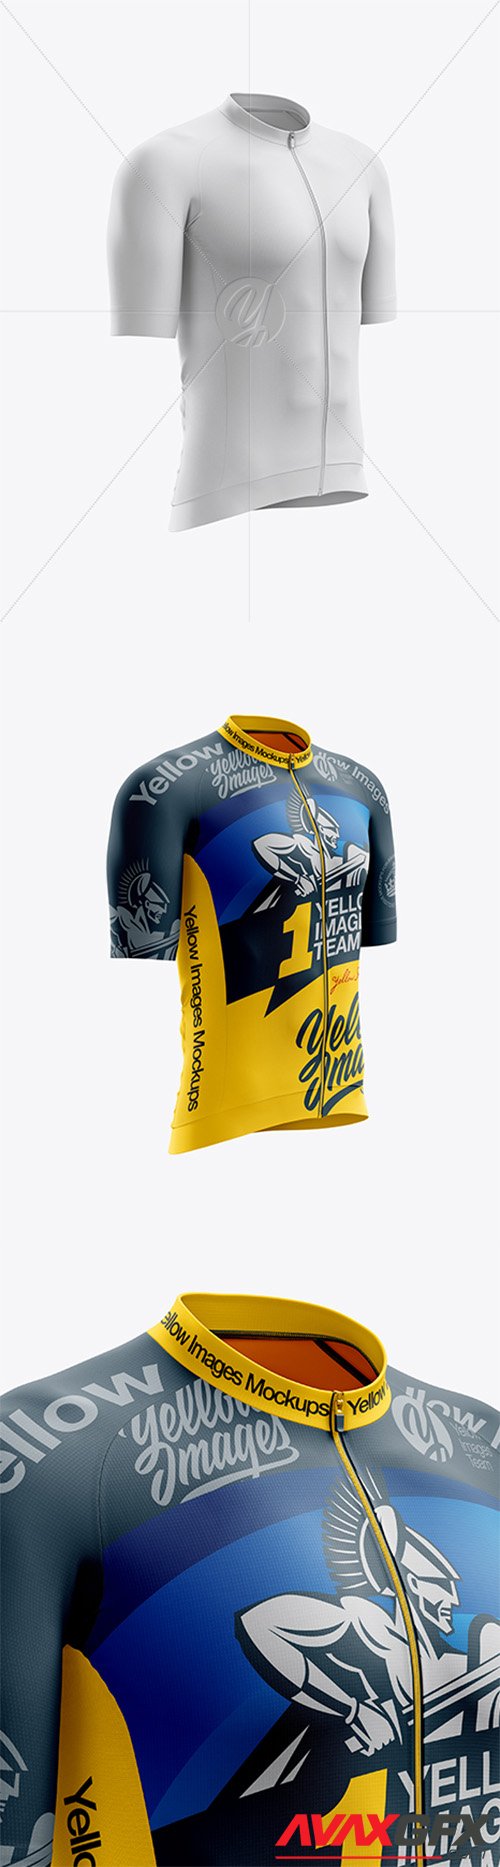 Download Men's Cycling Speed Jersey mockup (Right Half Side View ...